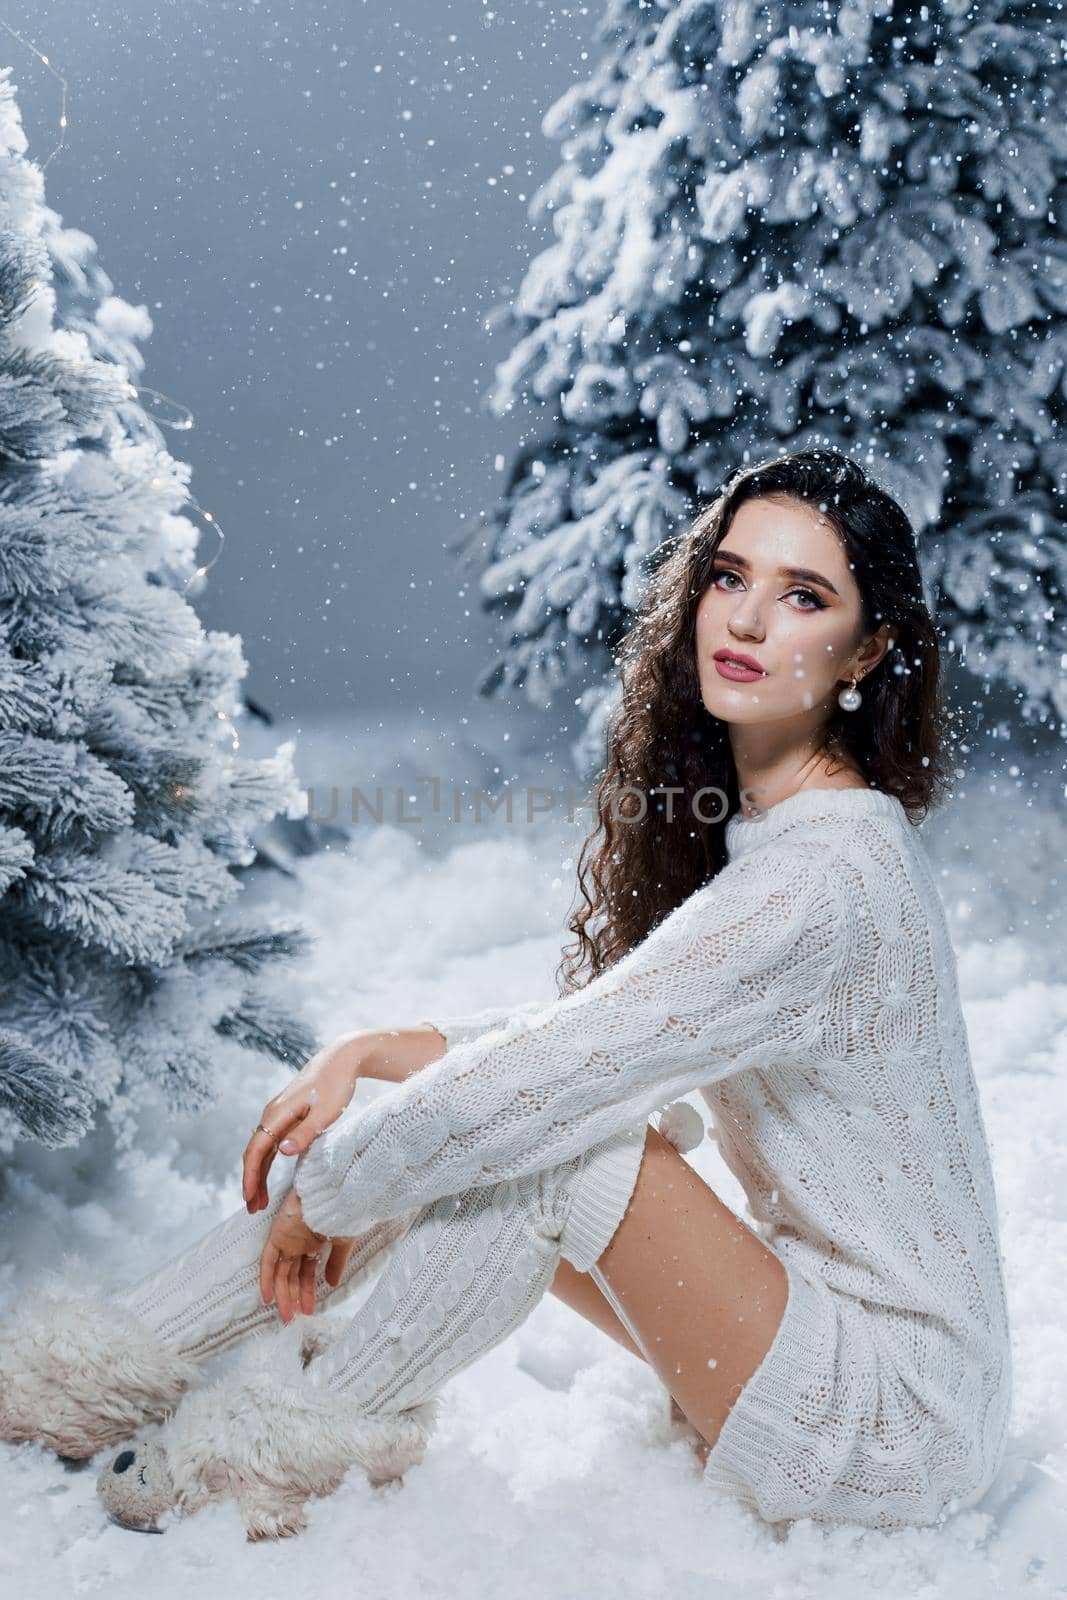 Attractive girl in a warm white sweater and white socks near snowy trees before the new year. Christmas holiday.